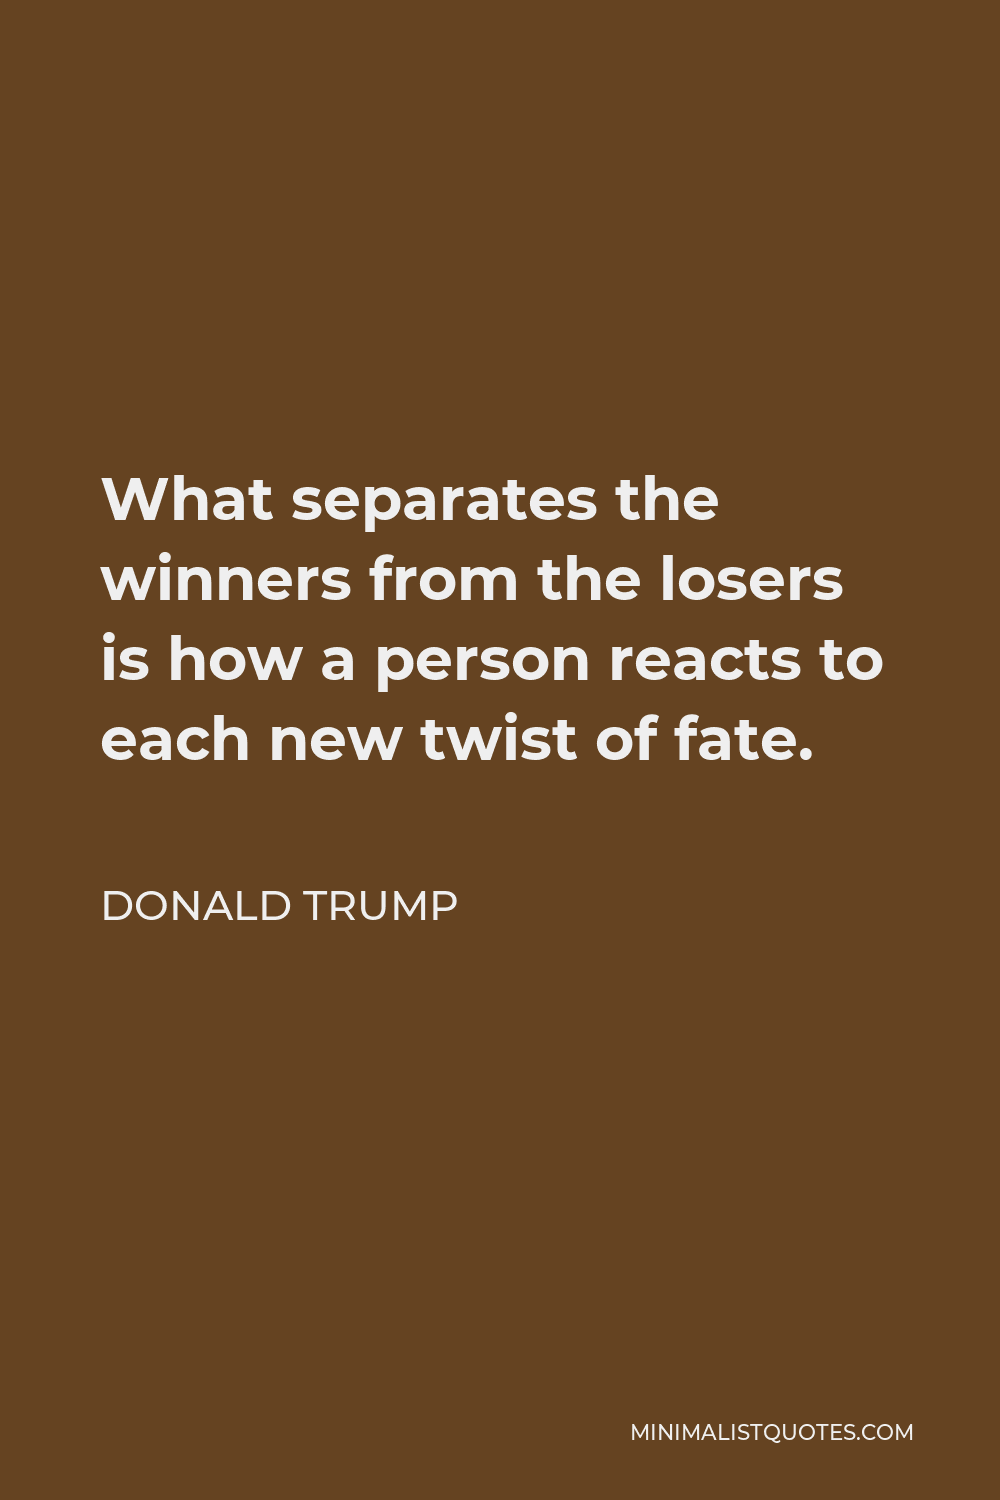 Donald Trump Quote - What separates the winners from the losers is how a person reacts to each new twist of fate.